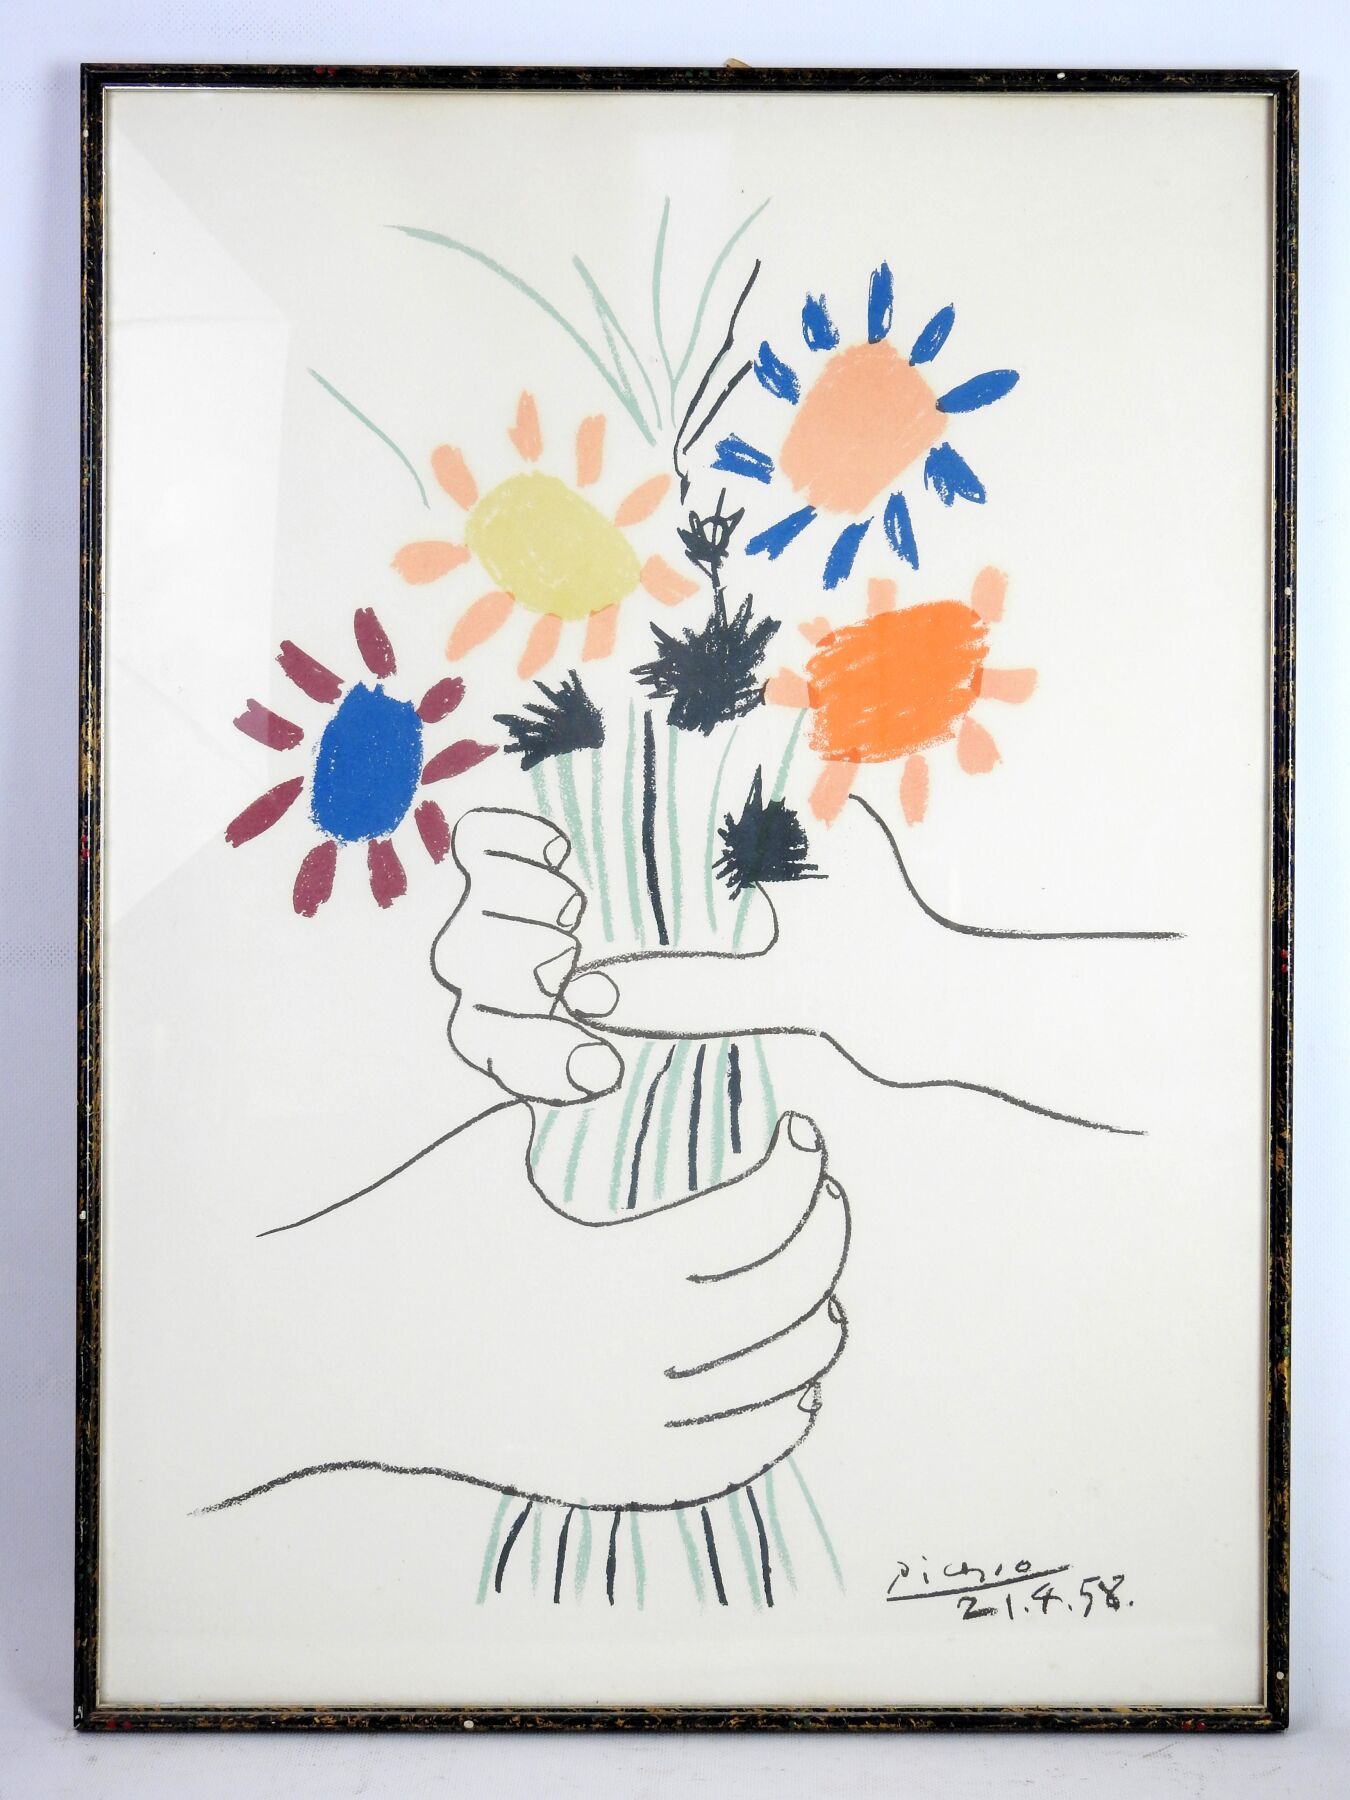 Null Pablo PICASSO (1881 - 1973) after :

Hands and bouquet. 21. 4. 58.

Print i&hellip;